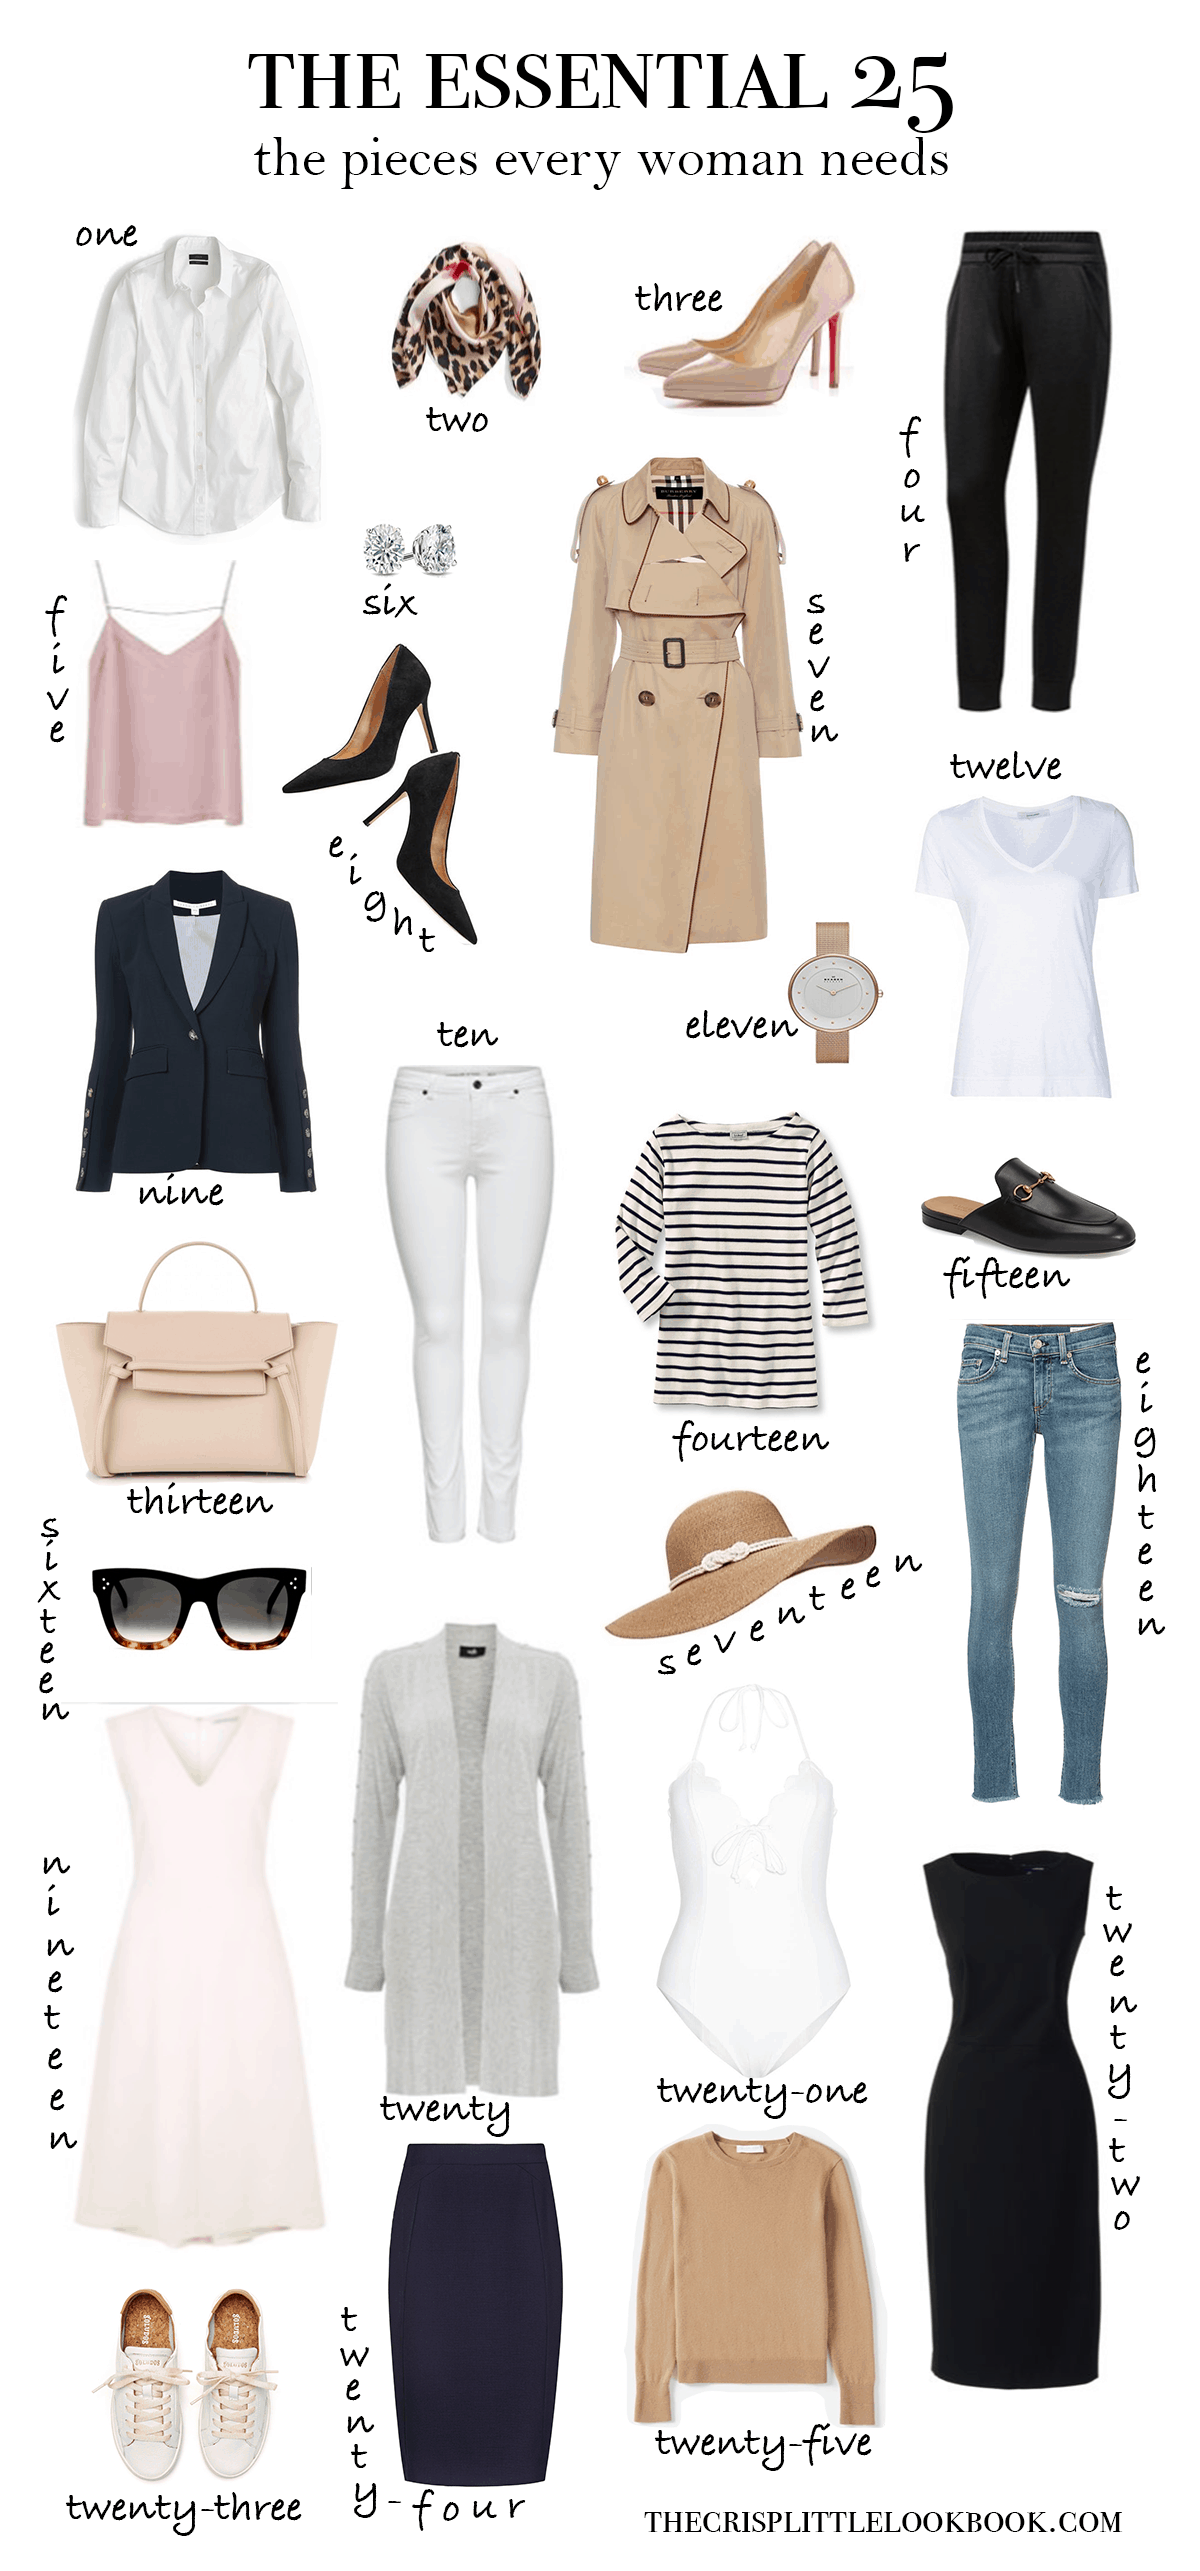 COLOUR ESSENTIALS EVERY WOMAN SHOULD KNOW - Style Clinic